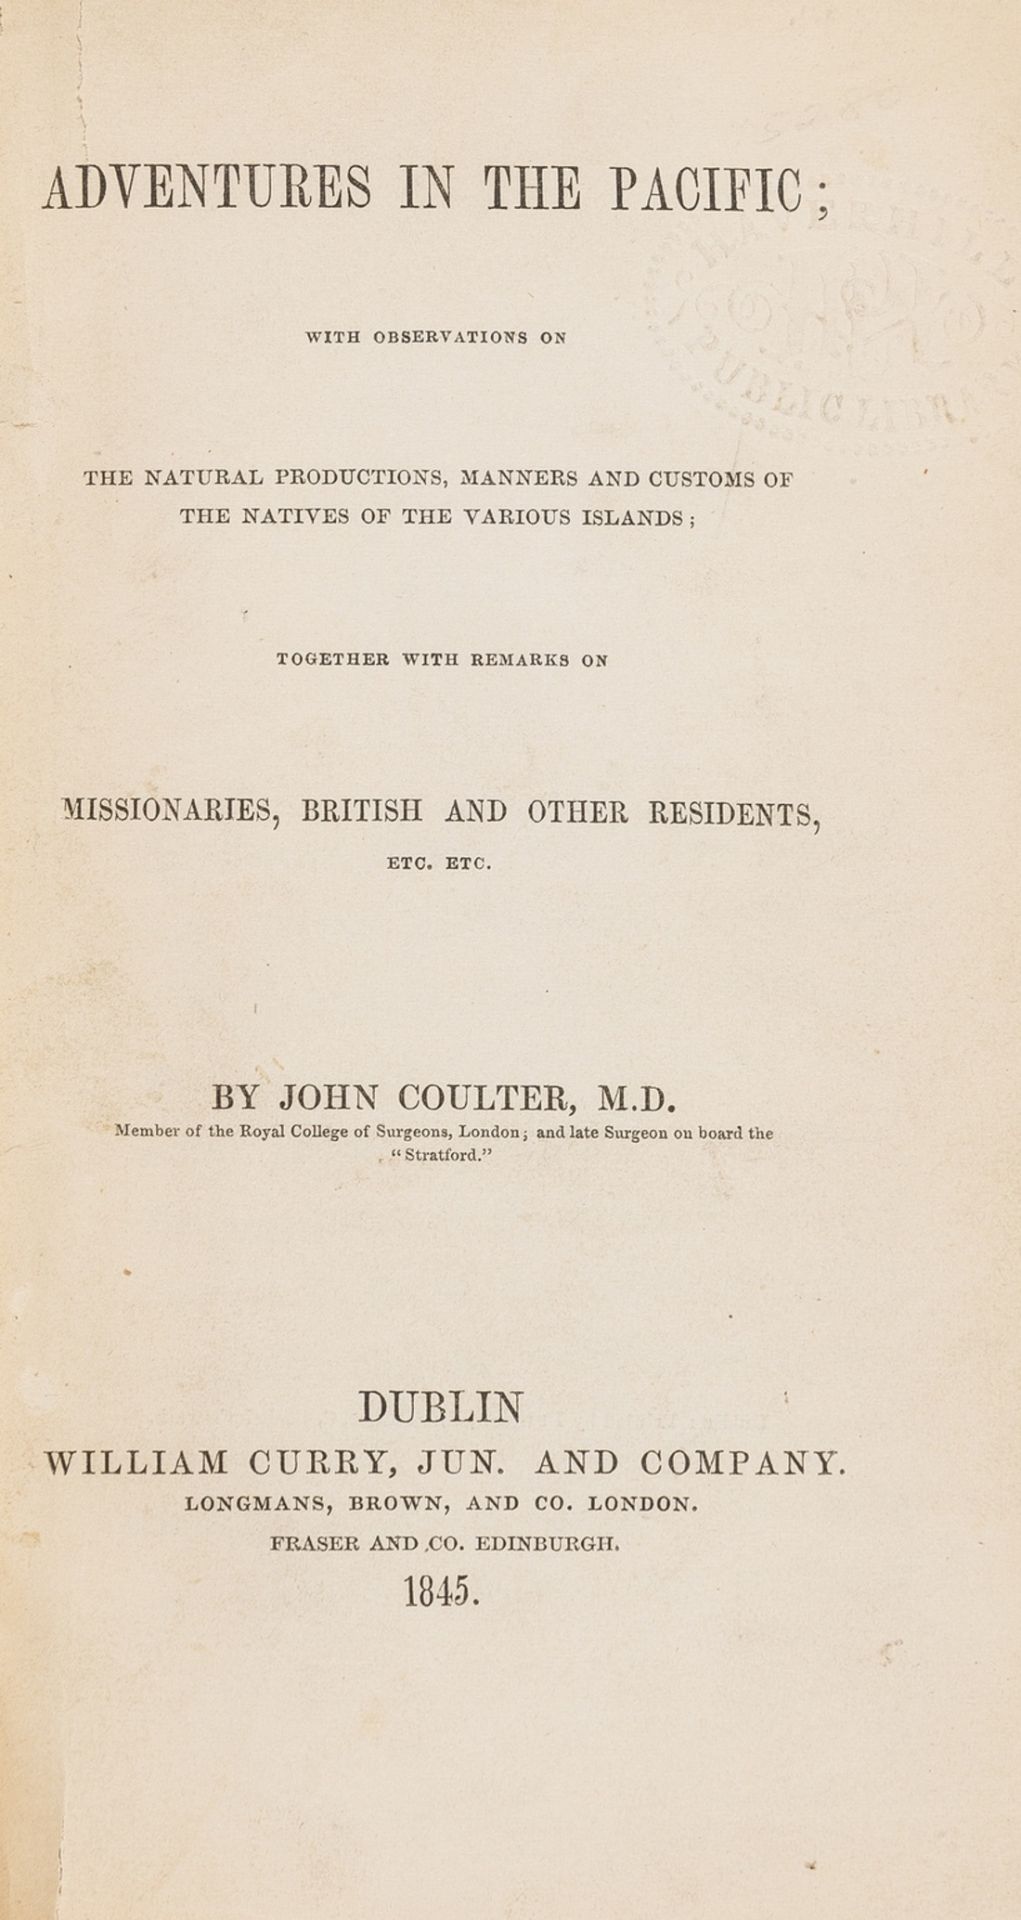 Voyages.- Coulter (John) Adventures in the Pacific, first edition, Dublin, 1845.